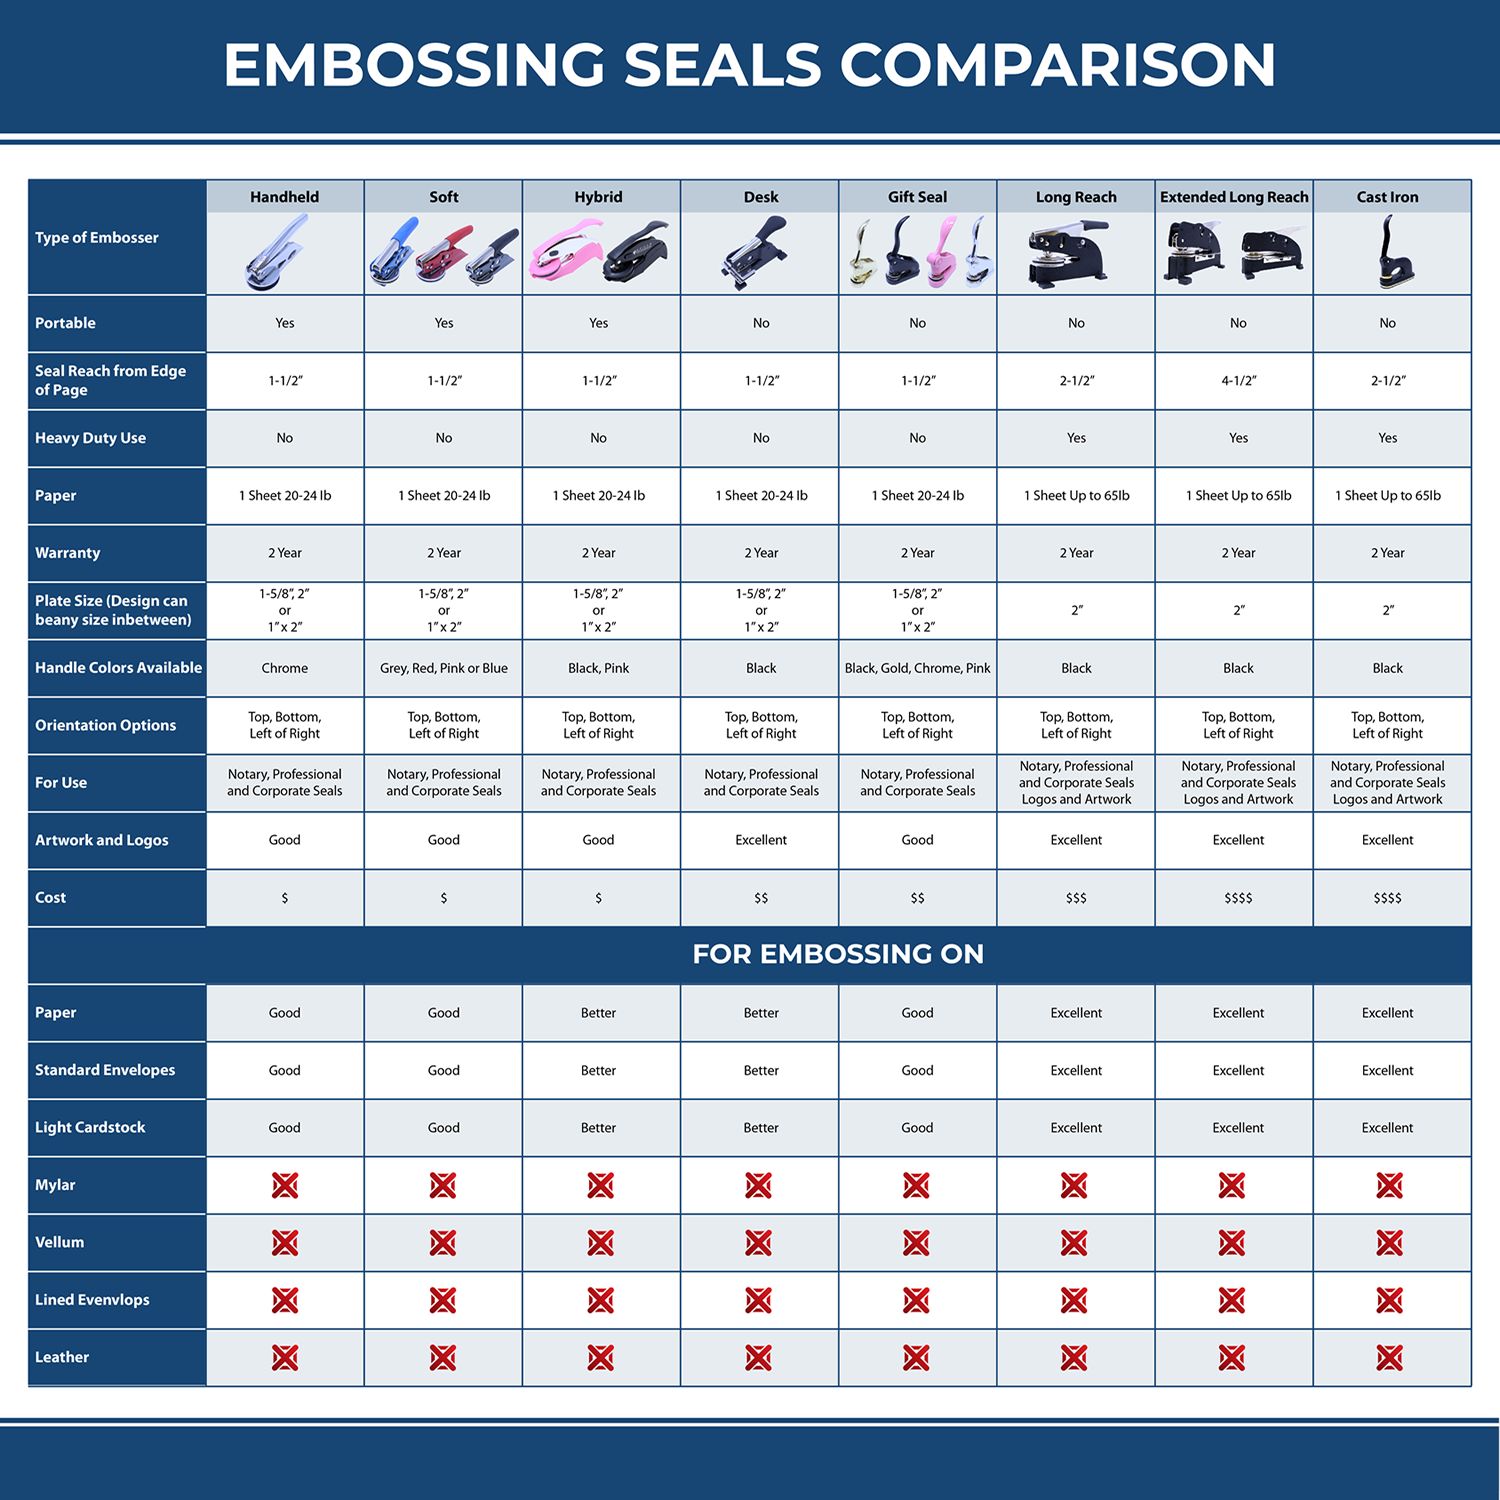 A comparison chart for the different types of mount models available for the Heavy Duty Cast Iron Tennessee Land Surveyor Seal Embosser.